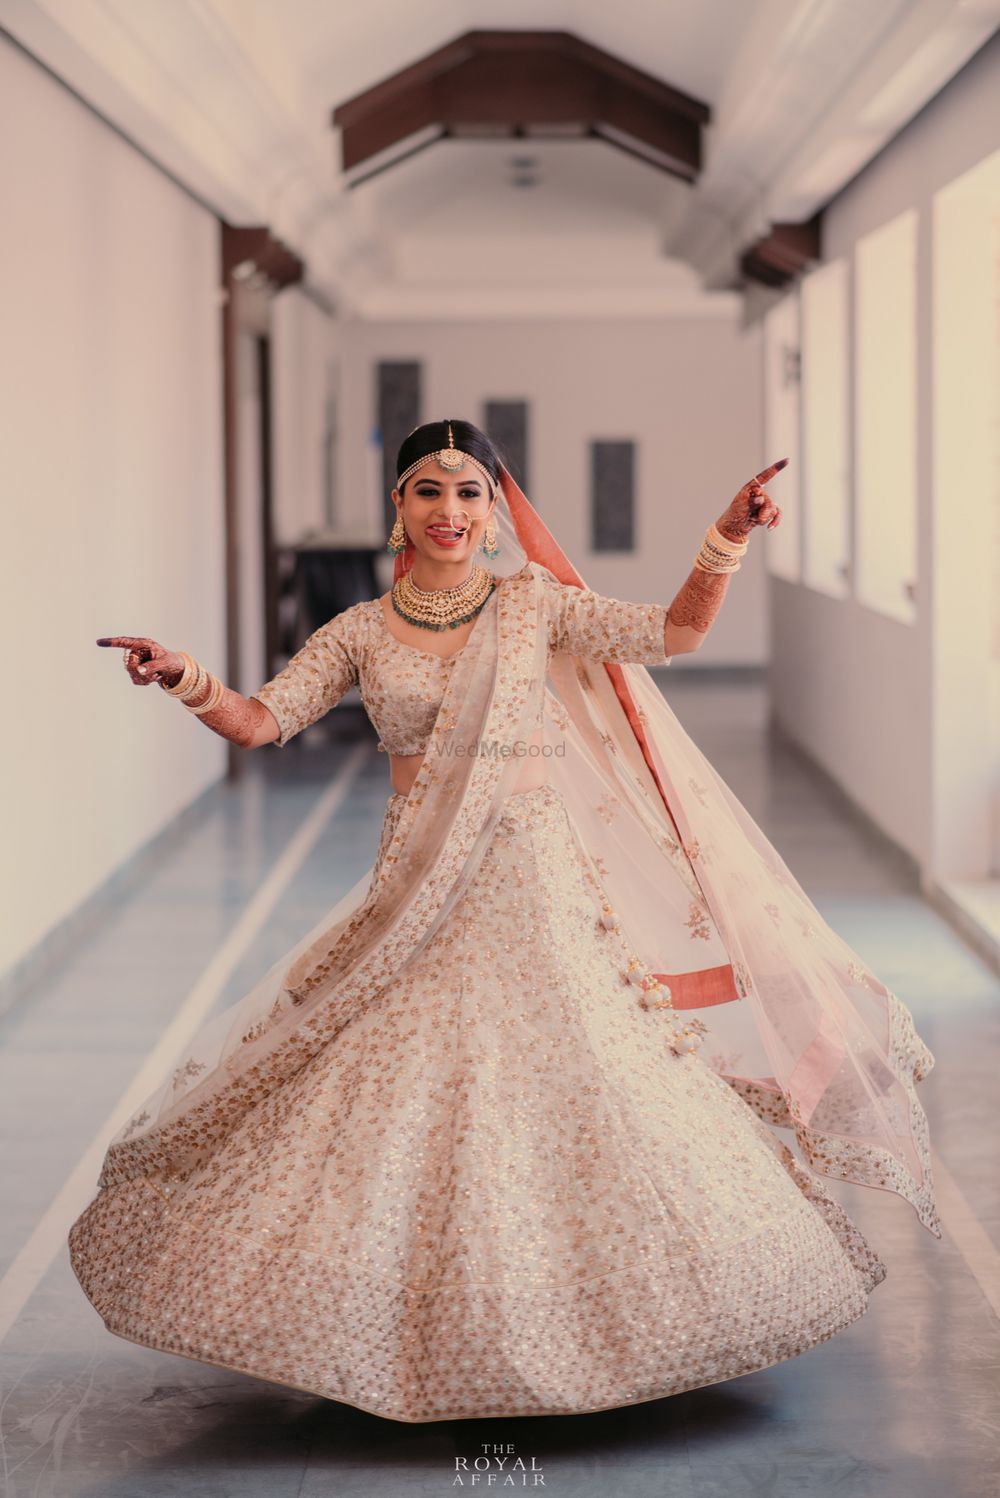 Photo of Twirling bride in white and gold lehenga